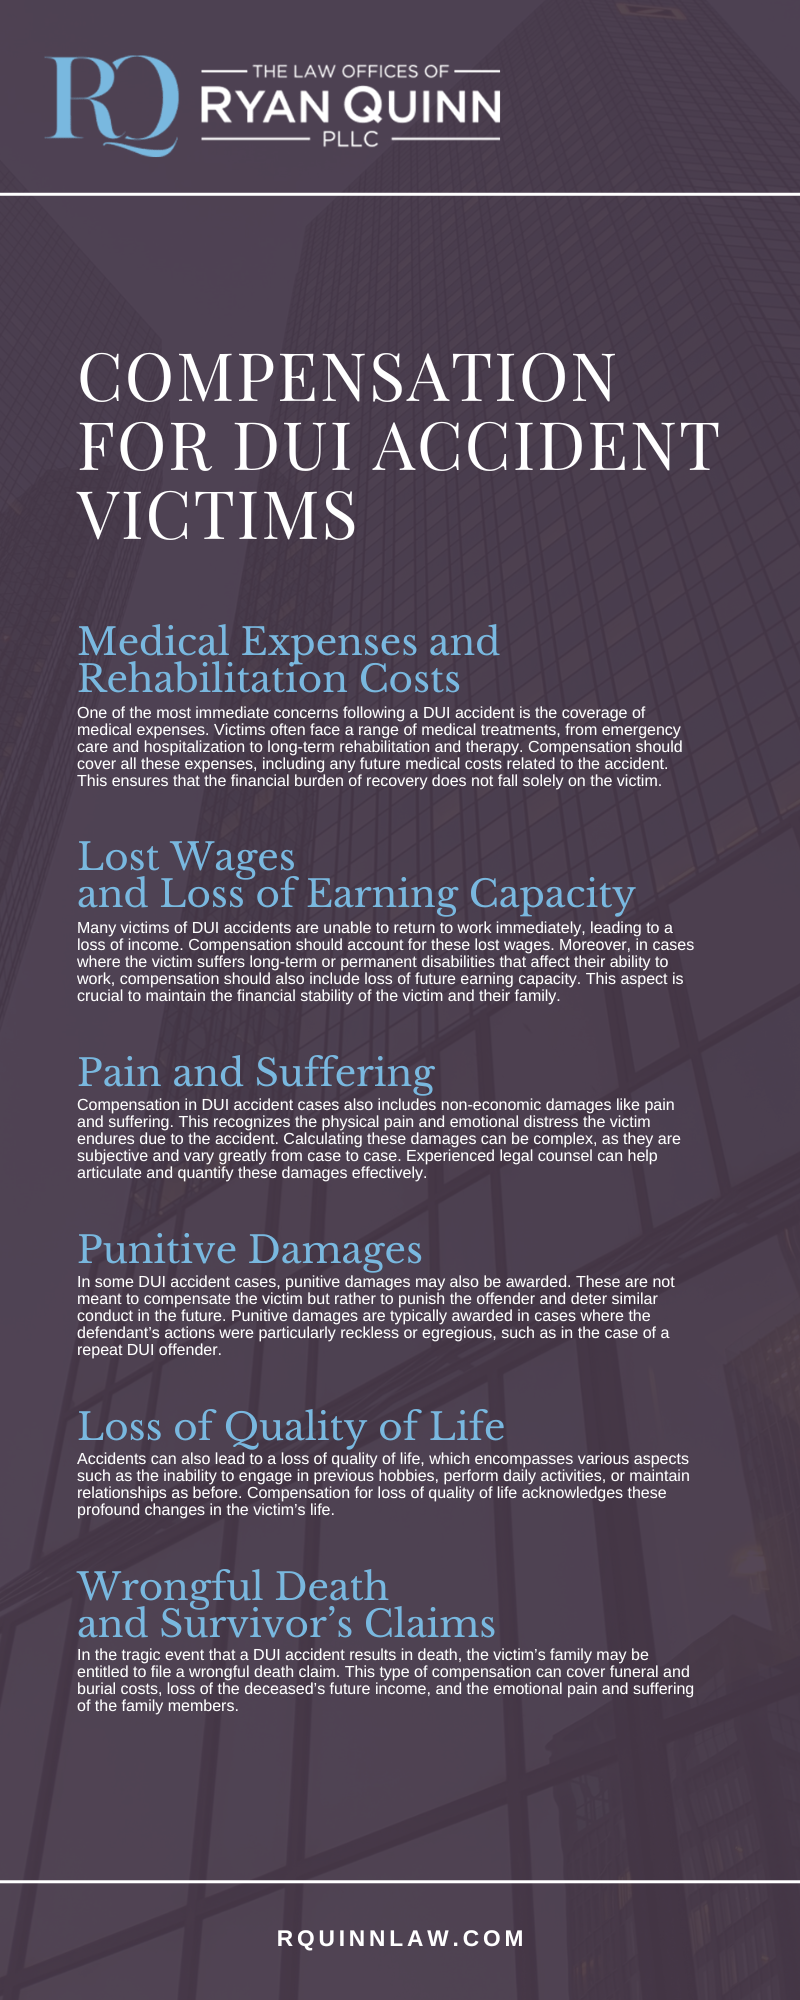 Compensation For DUI Accident Victims Infographic